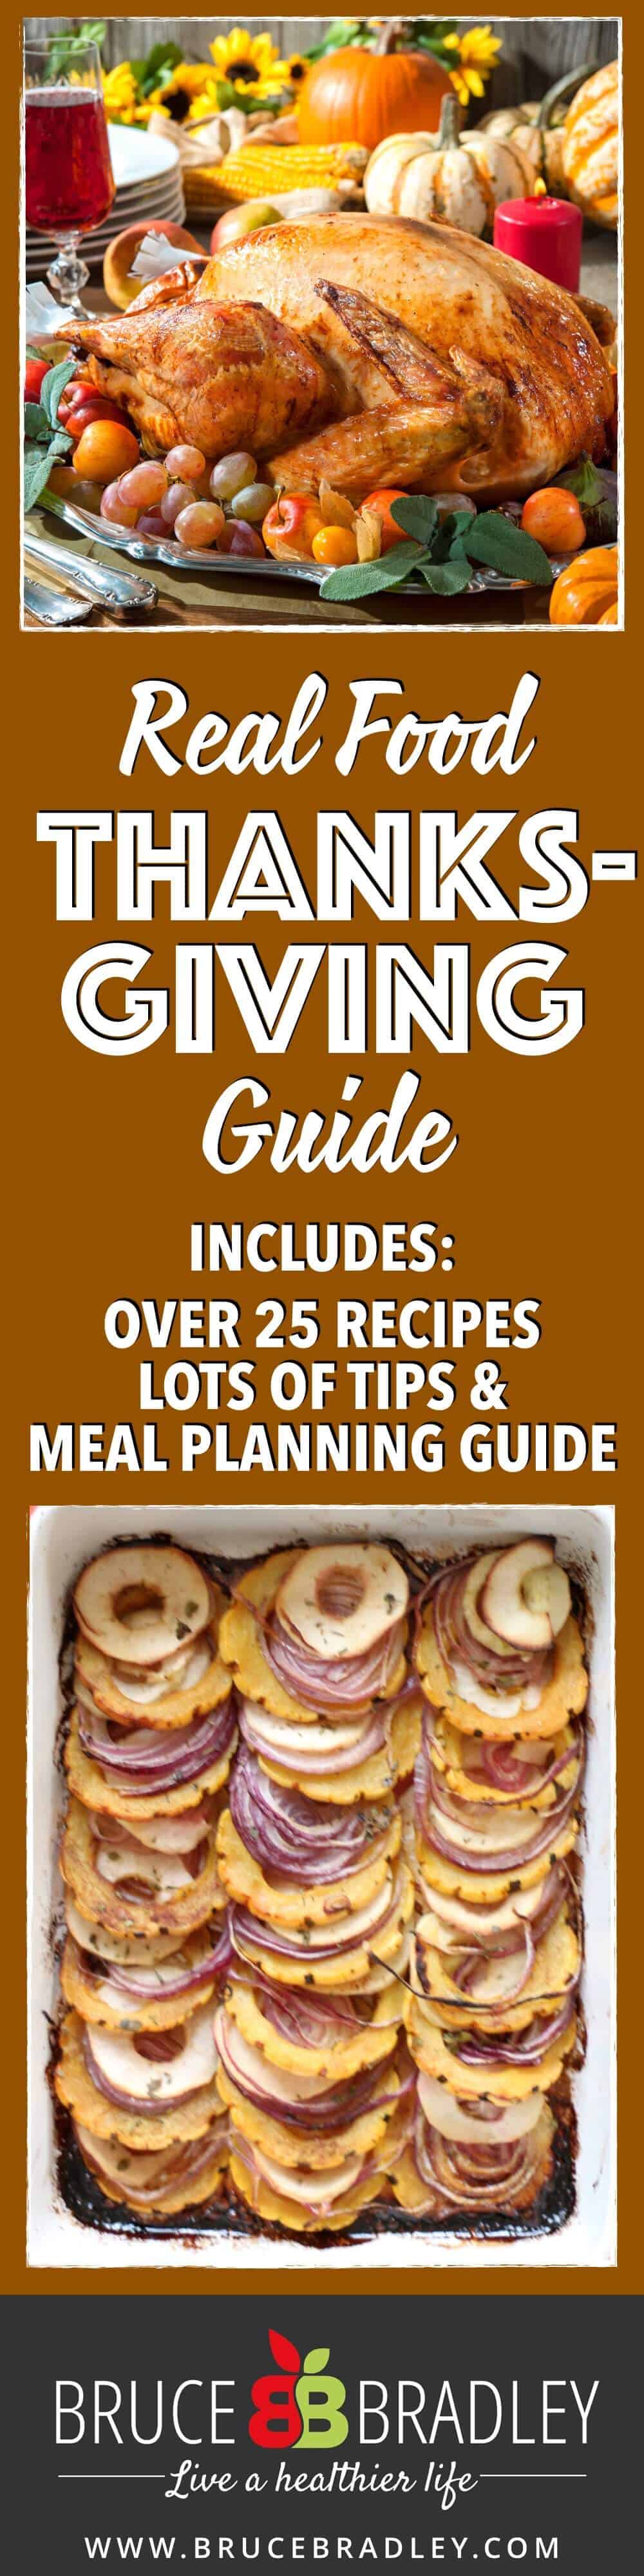 Bruce Bradley'S Real Food Thanksgiving Guide With Over 25 Unprocessed Food Recipes, Tips For The Perfect Holiday Meal, And A Free Holiday Meal Planning Guide! Here'S To Creating Your Best, Real Food Thanksgiving Ever!